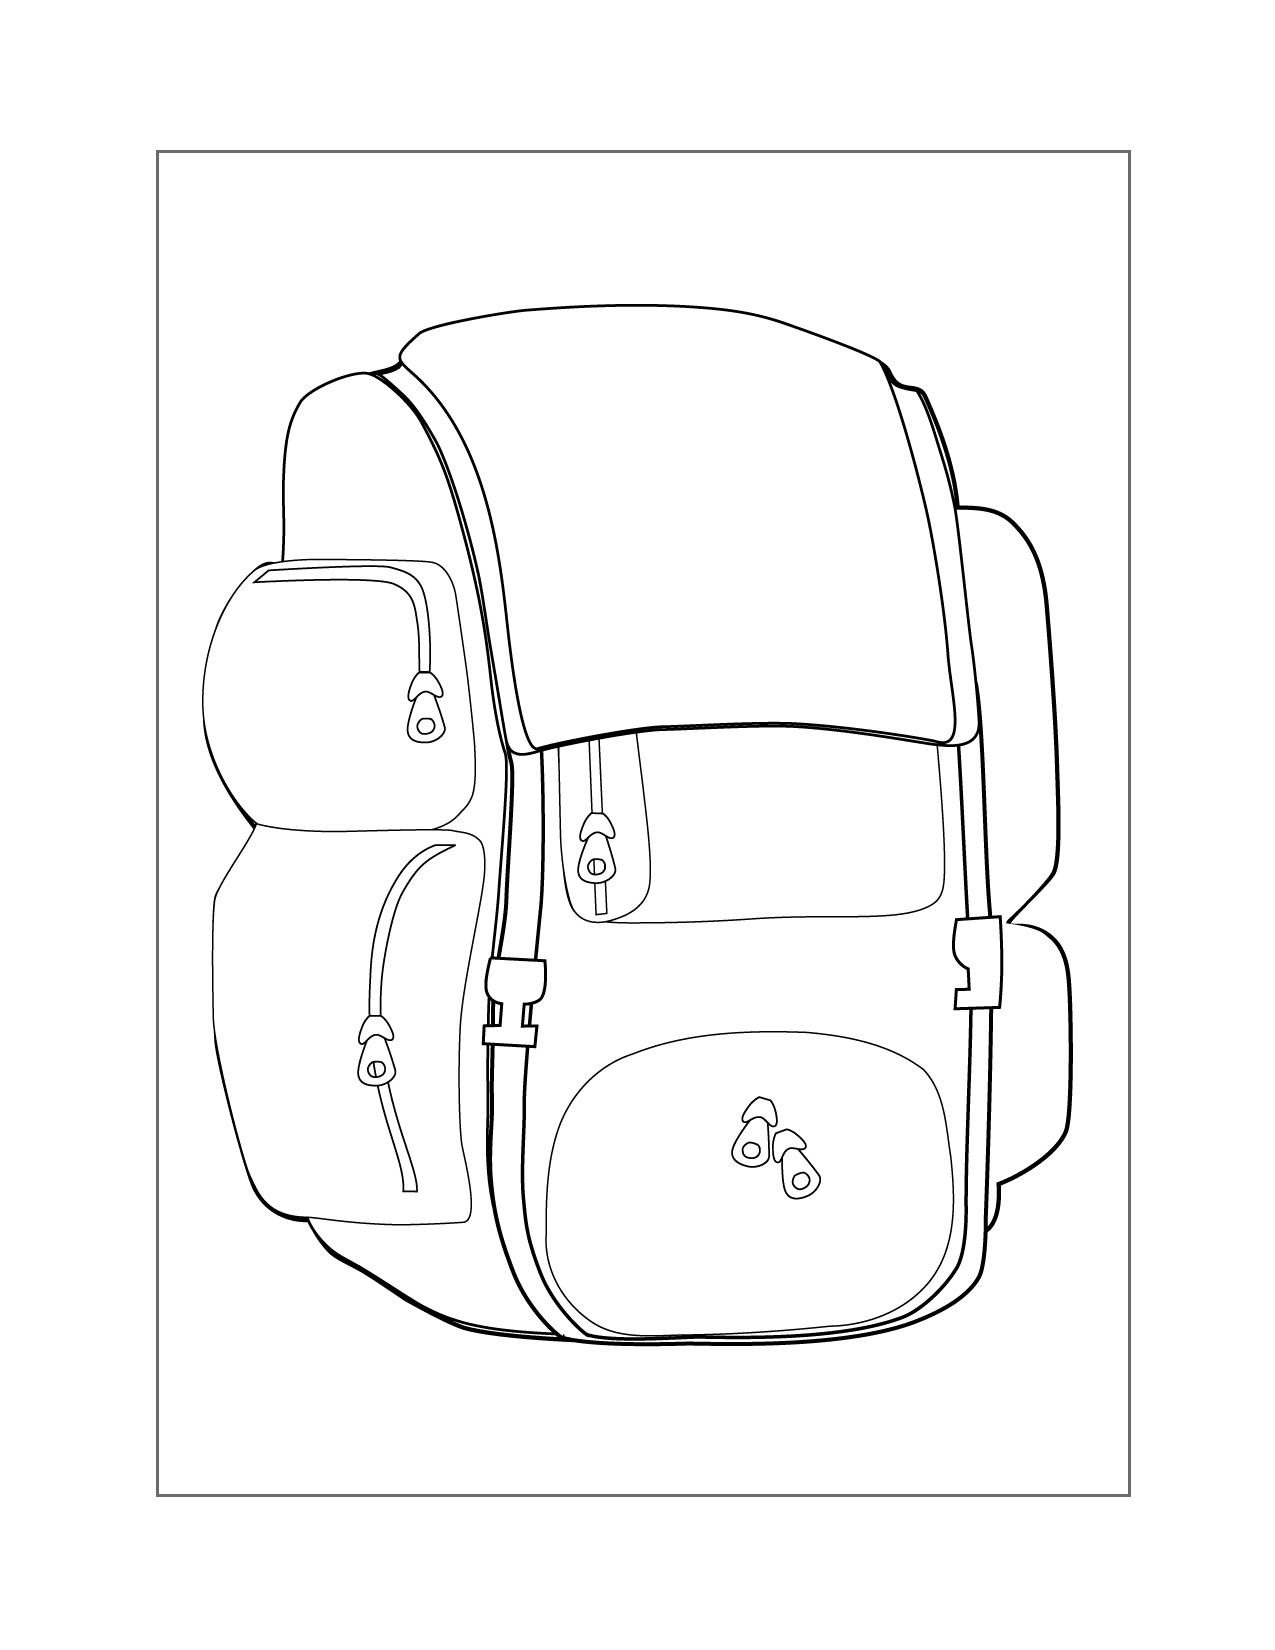 Camping Backpack Coloring Page